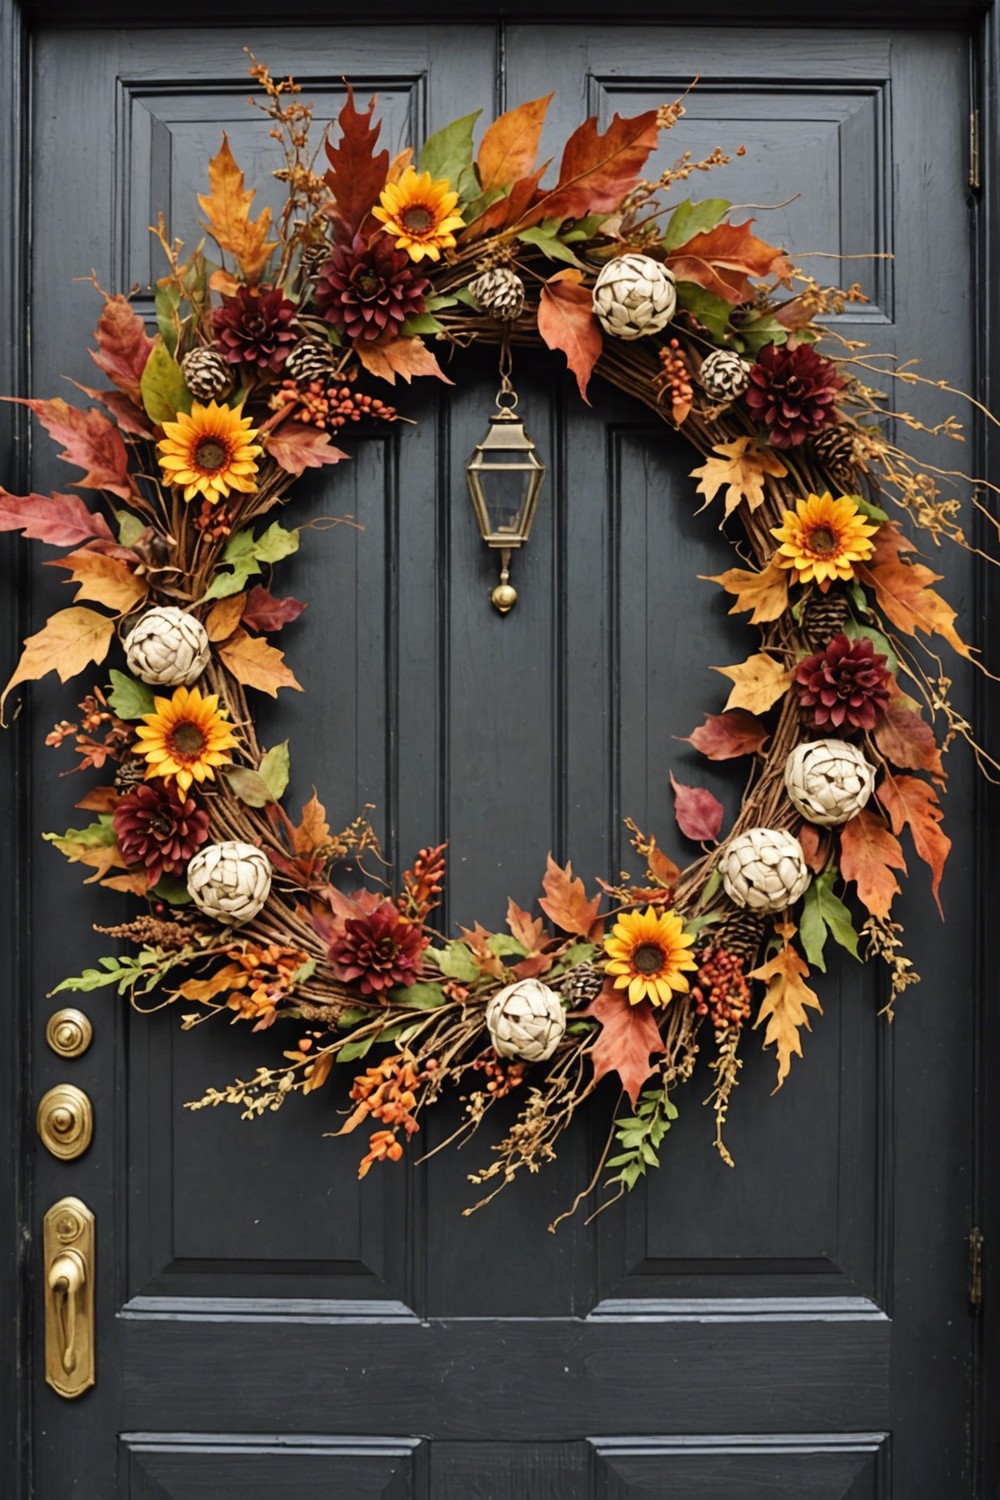 Add a Fall Wreath to Your Door